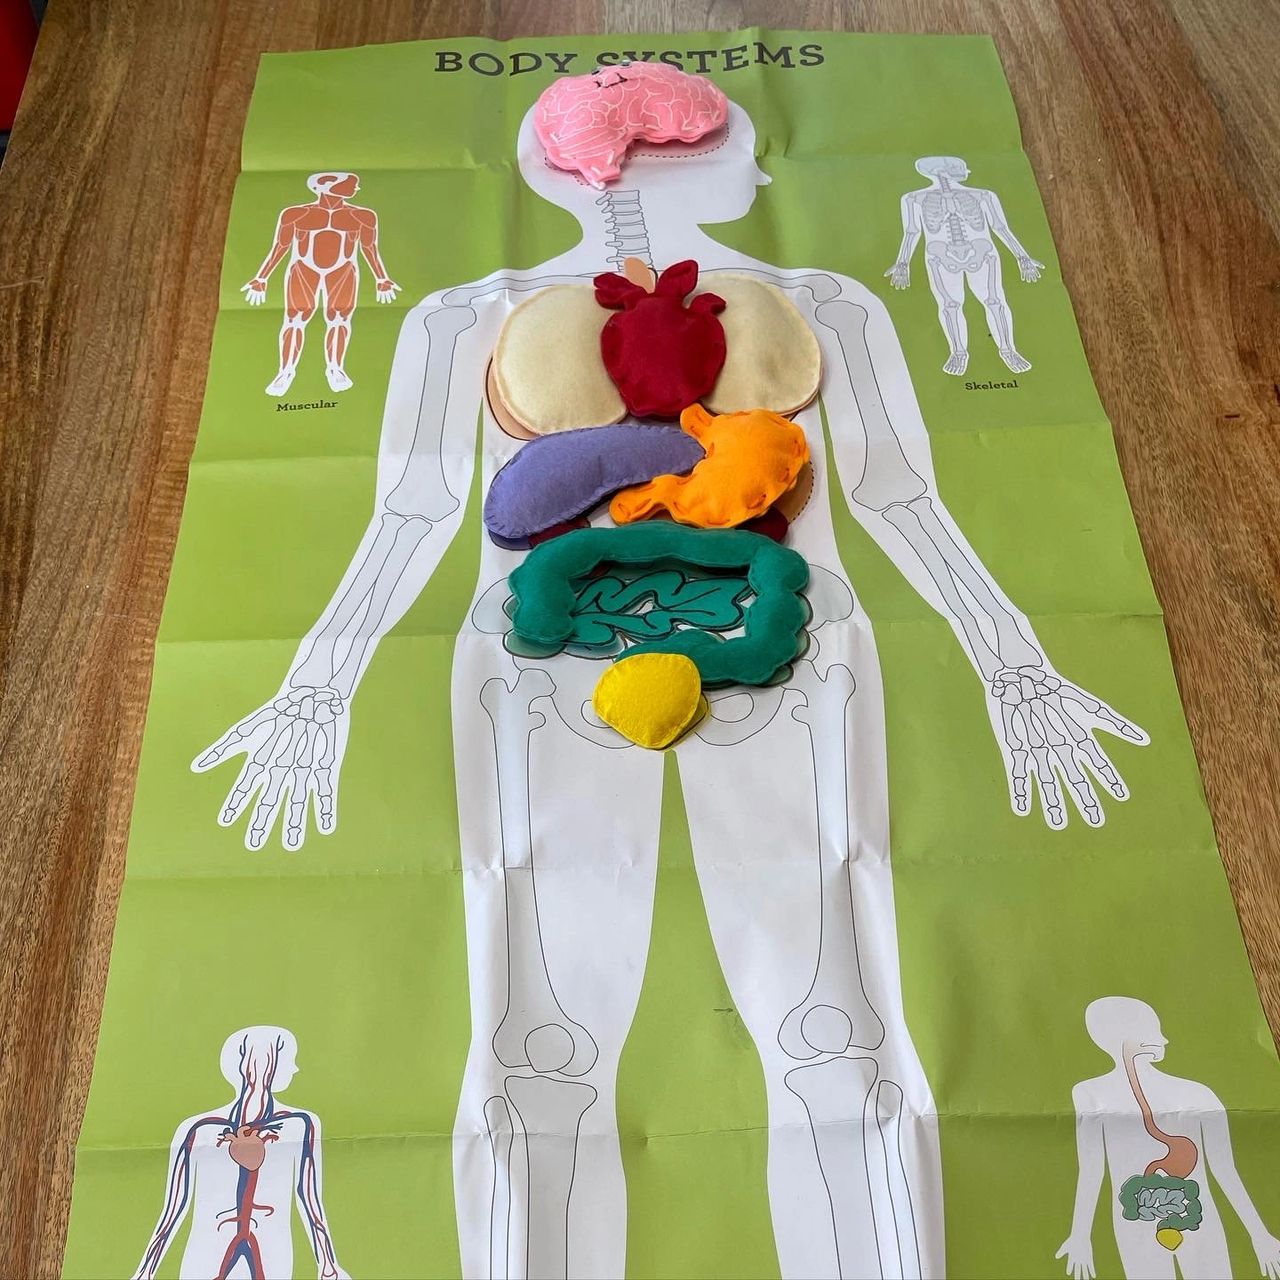 Human Body Project Ideas for Biology and Behavior